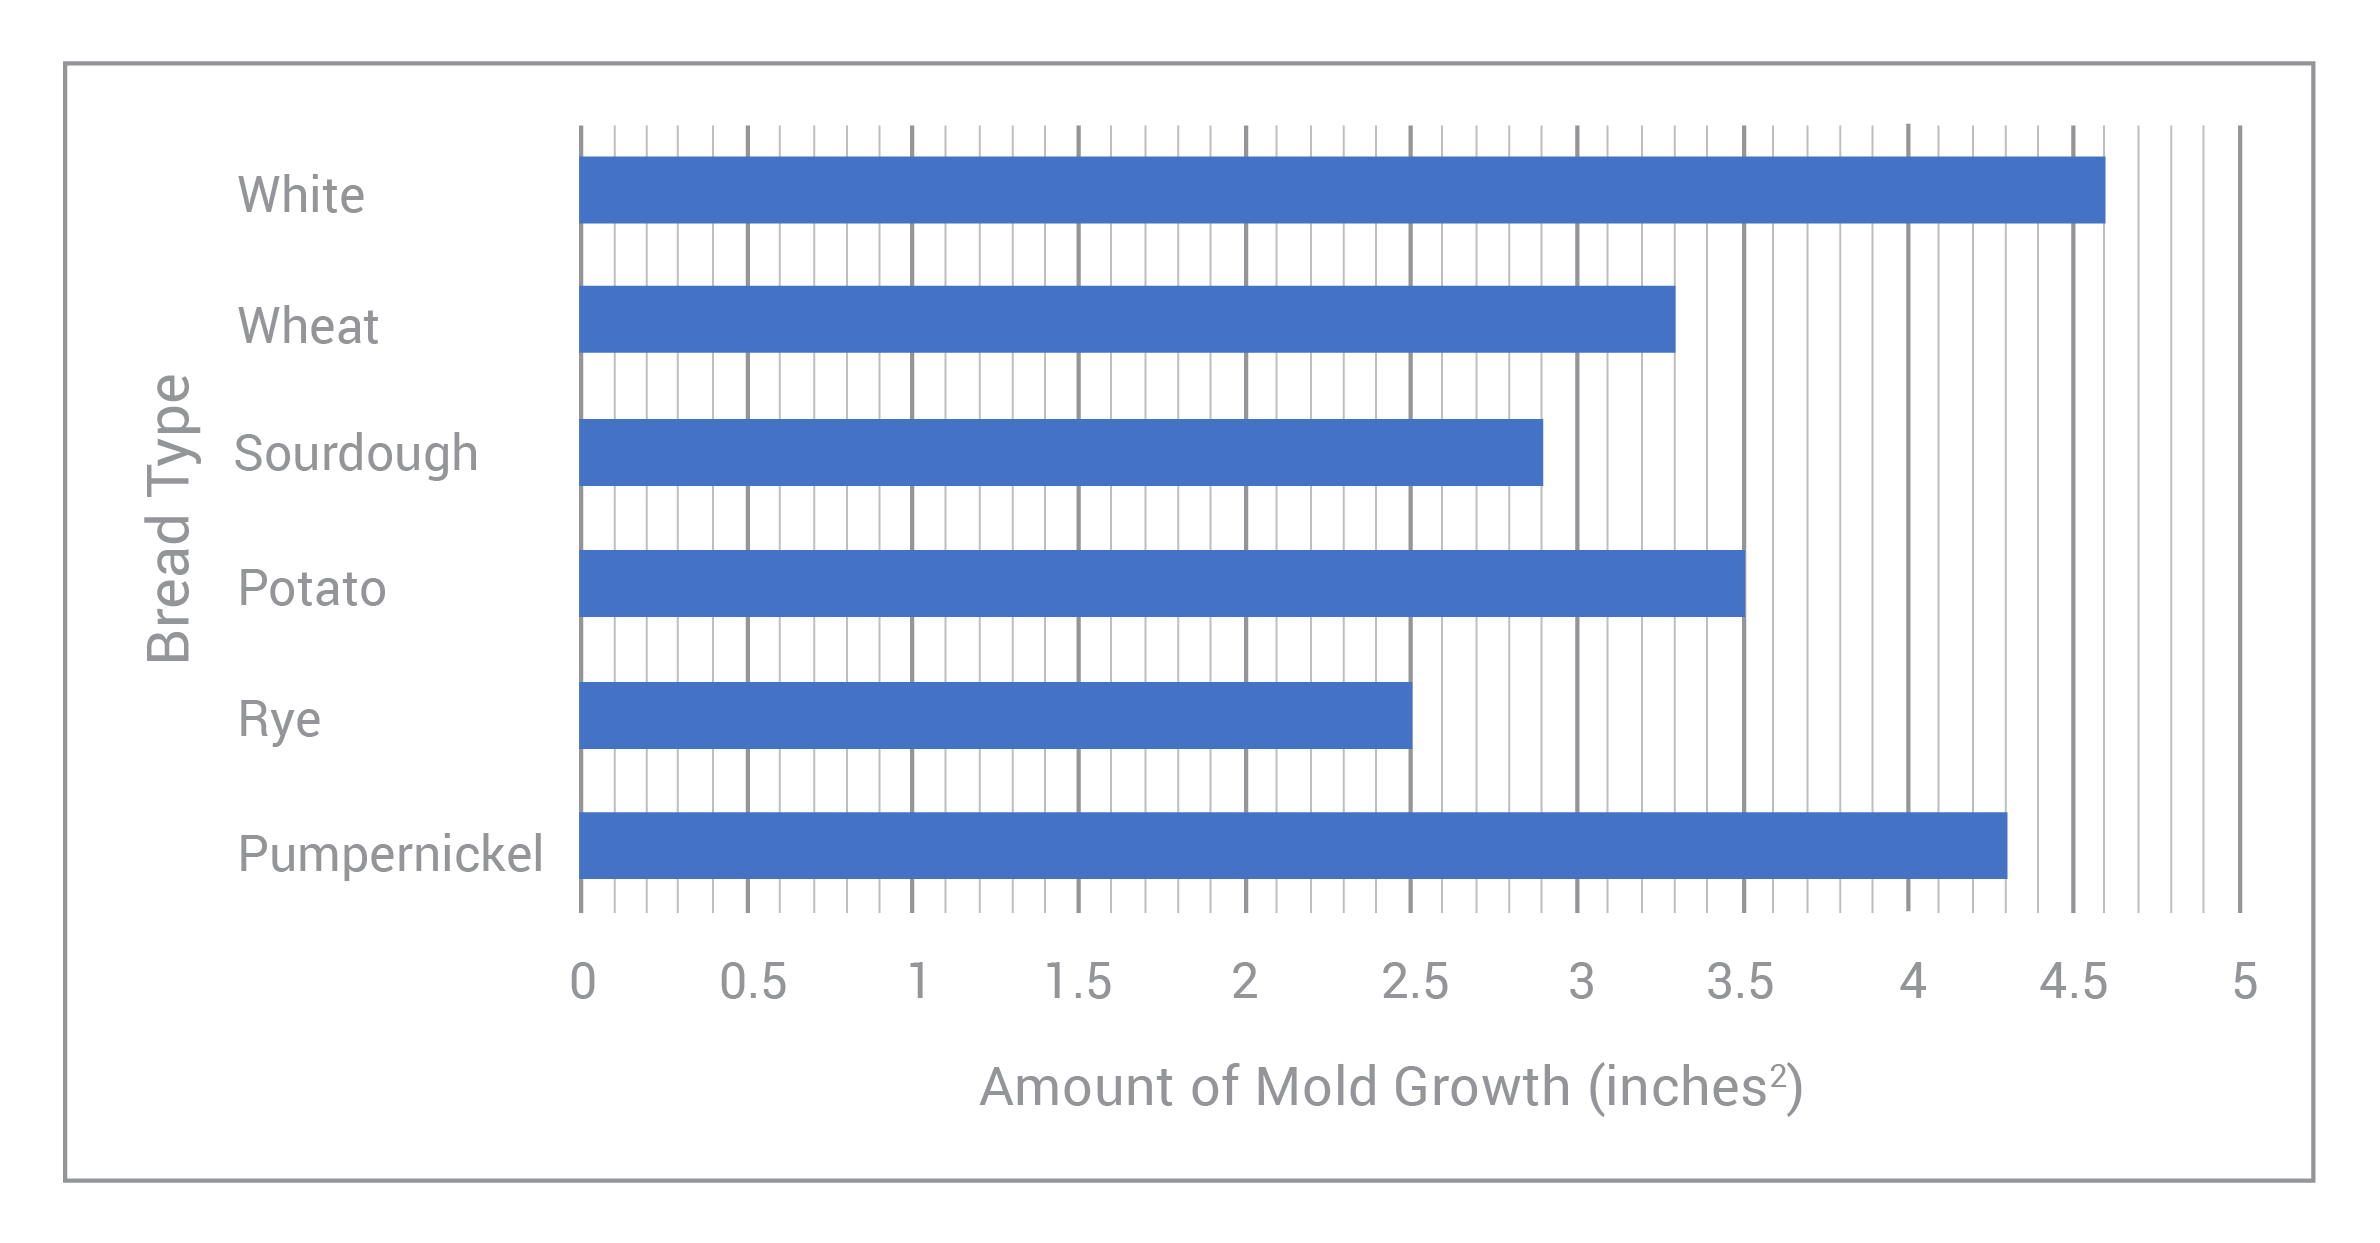 Bar graph of the amount of mold growth on several types of bread